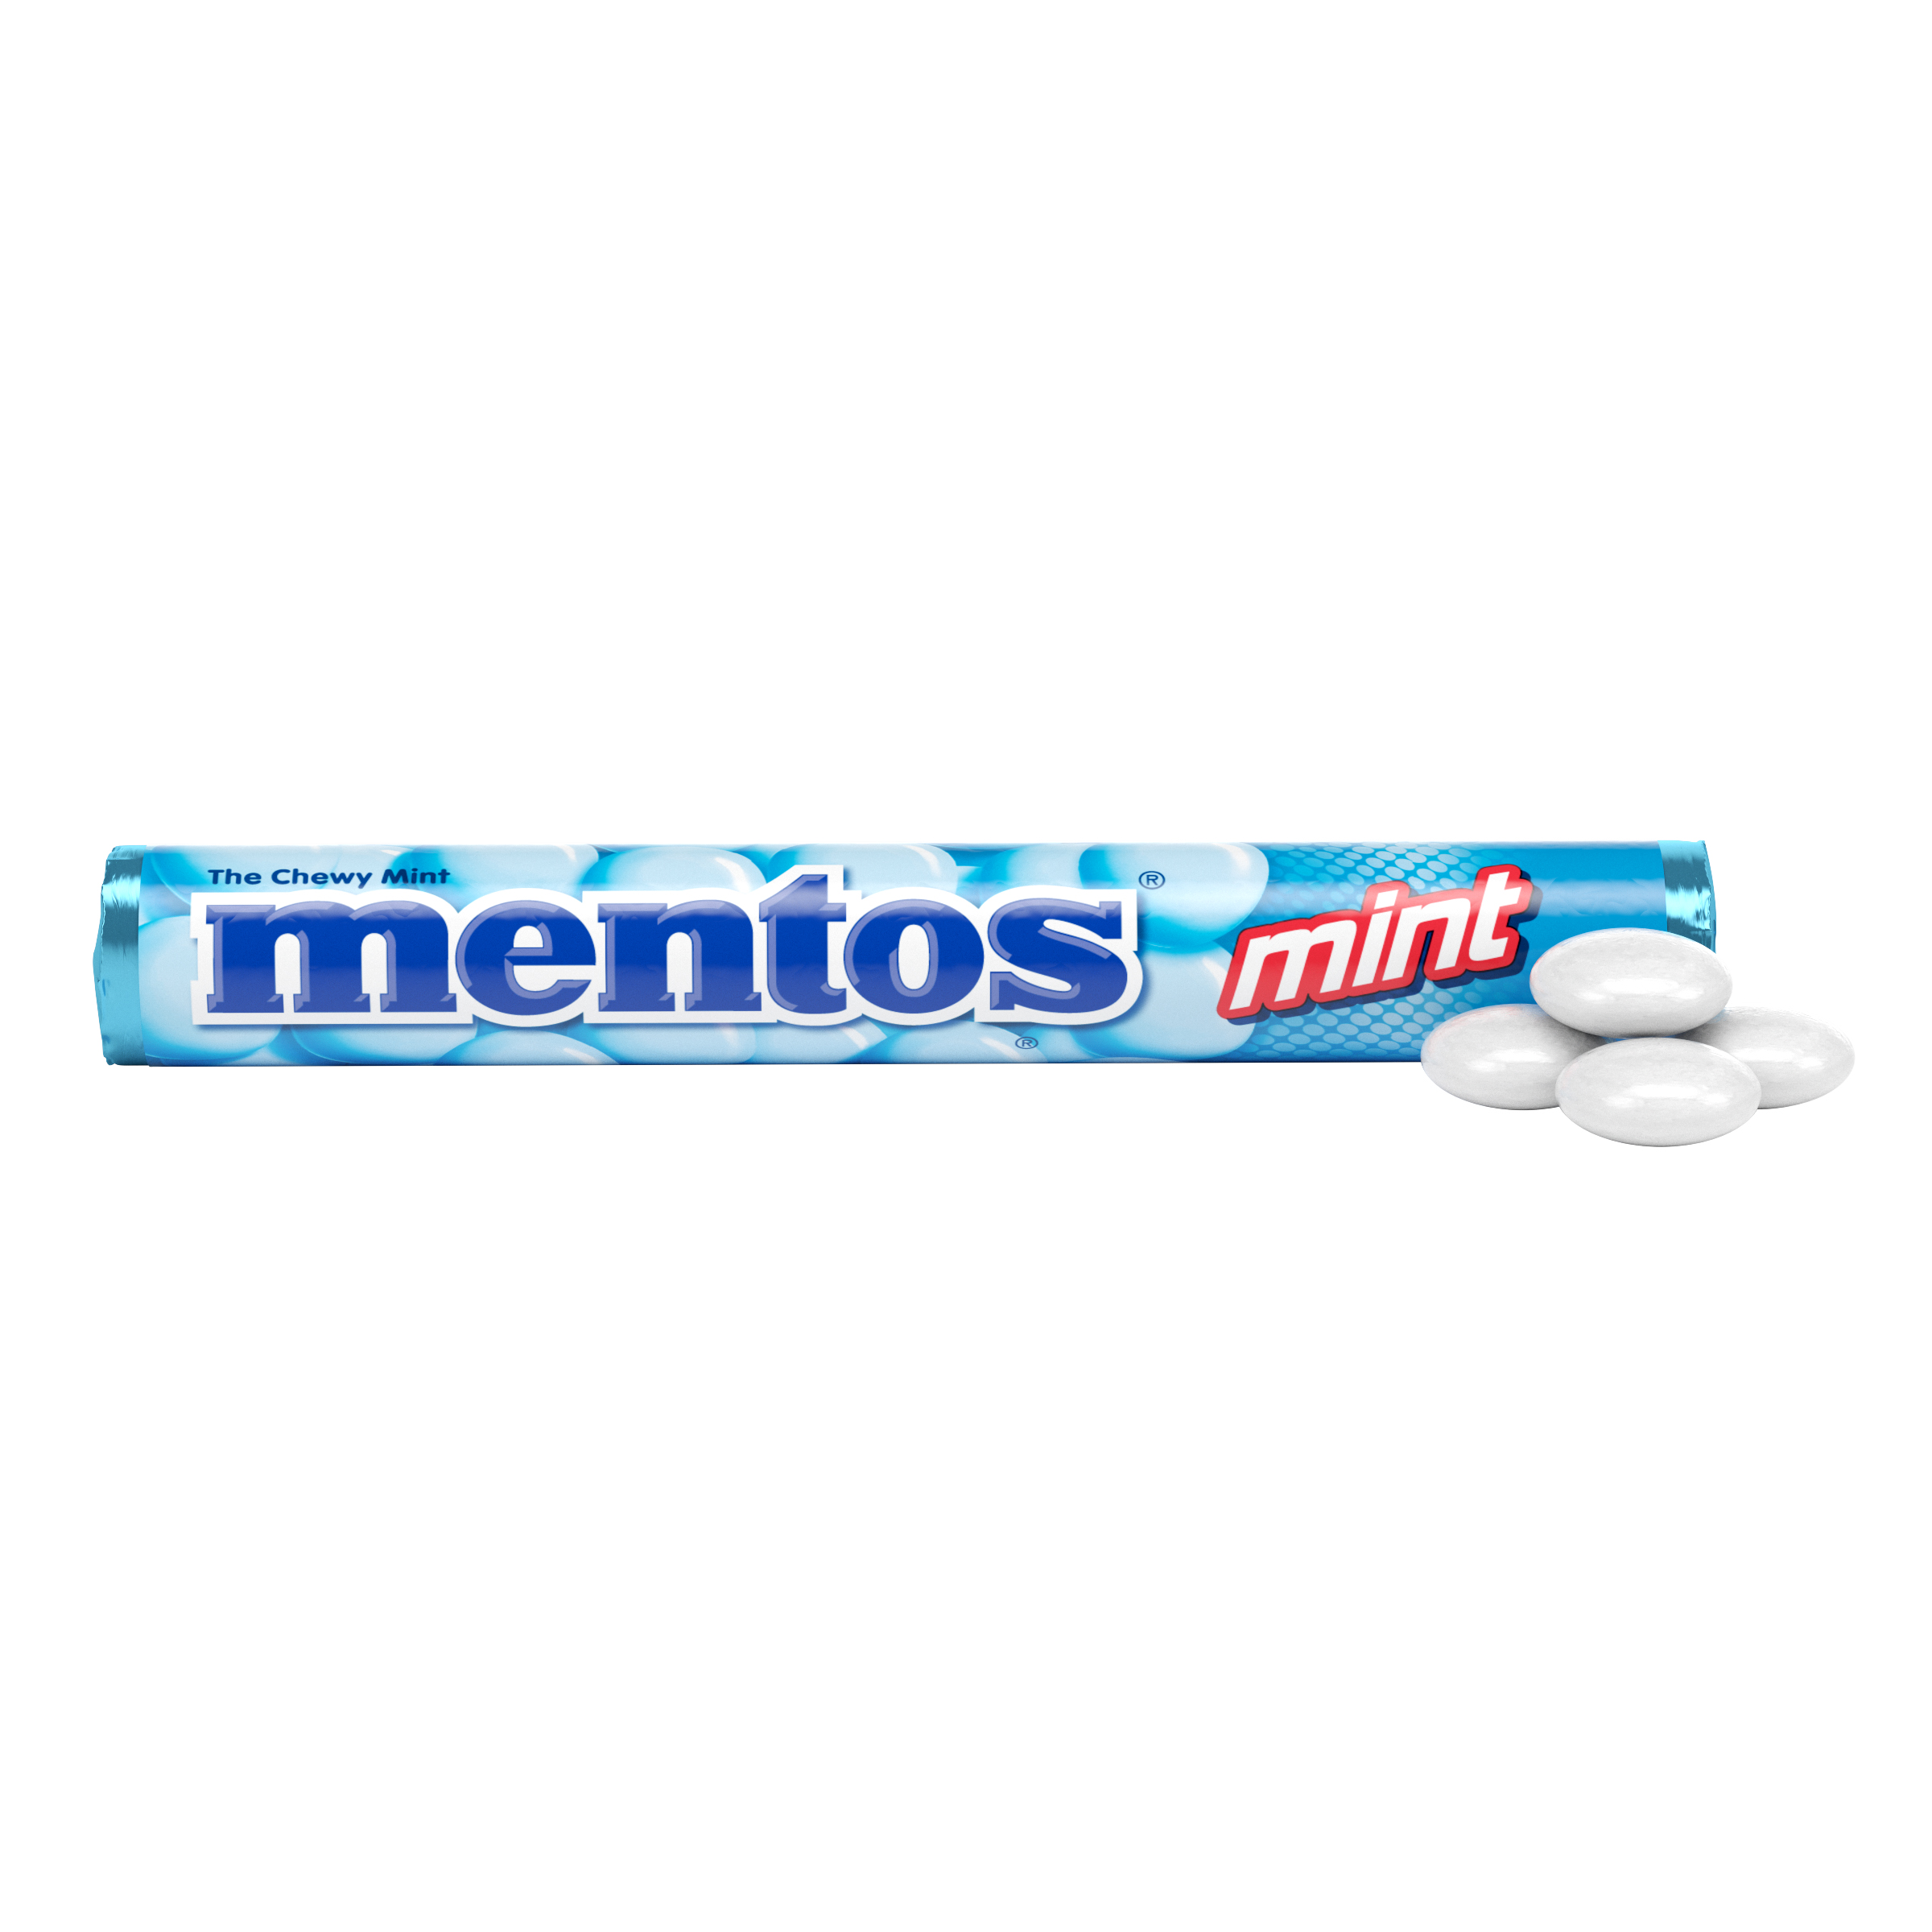 Mentos Chewy Mint Candy Roll, Fresh Mint Flavor, Peanut and Tree Nut Free, Regular Size, 1.32 oz - image 1 of 7